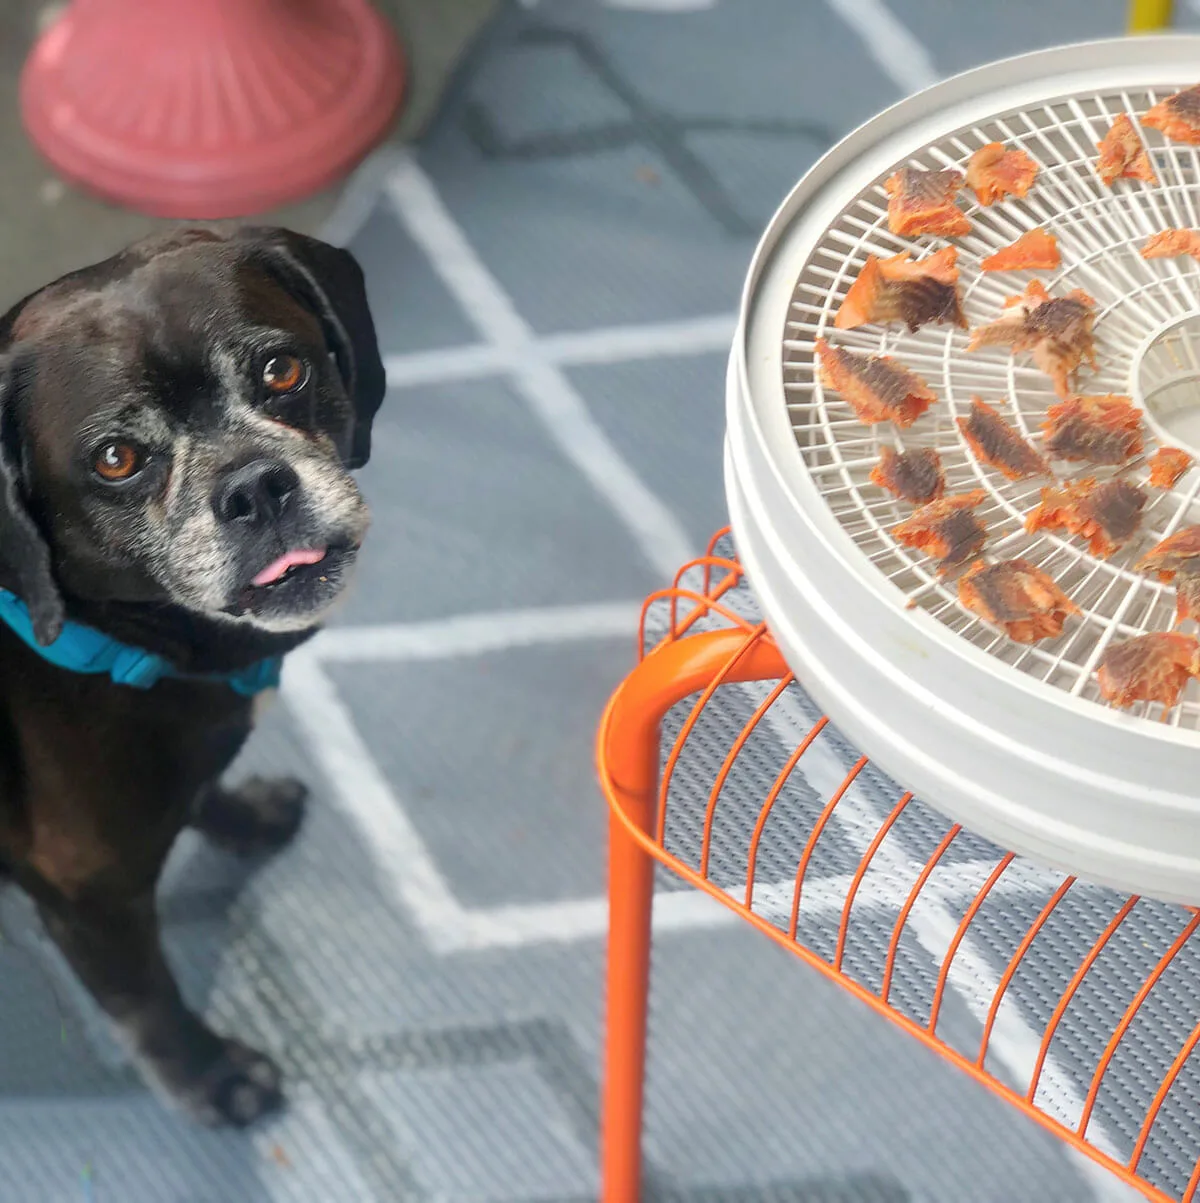 A black puggle with his tongue out stares intently at a dehydrator filled with small trout jerky pieces